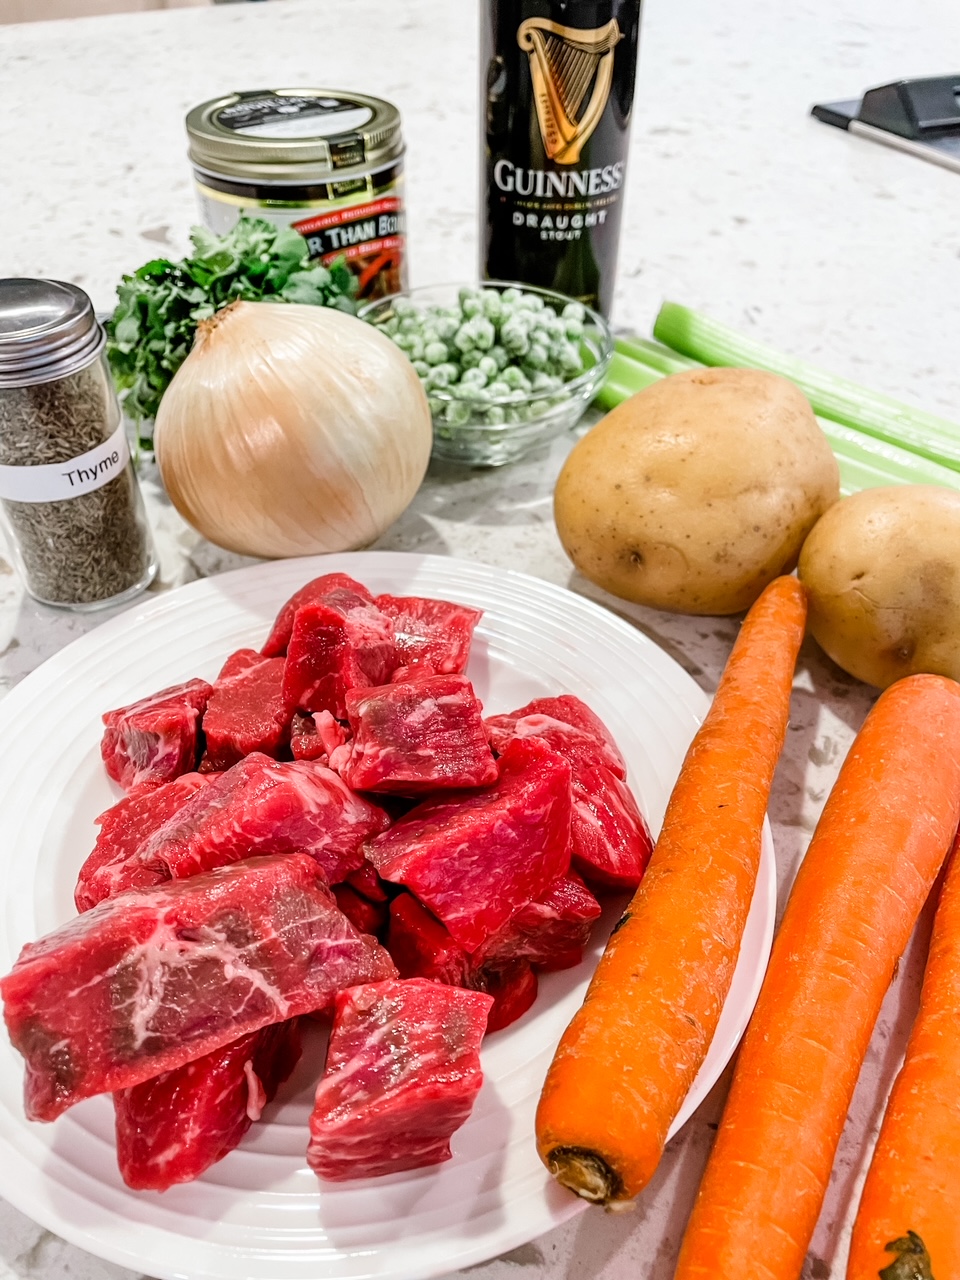 The ingredients, including an onion, cubed beef, carrots, and greens